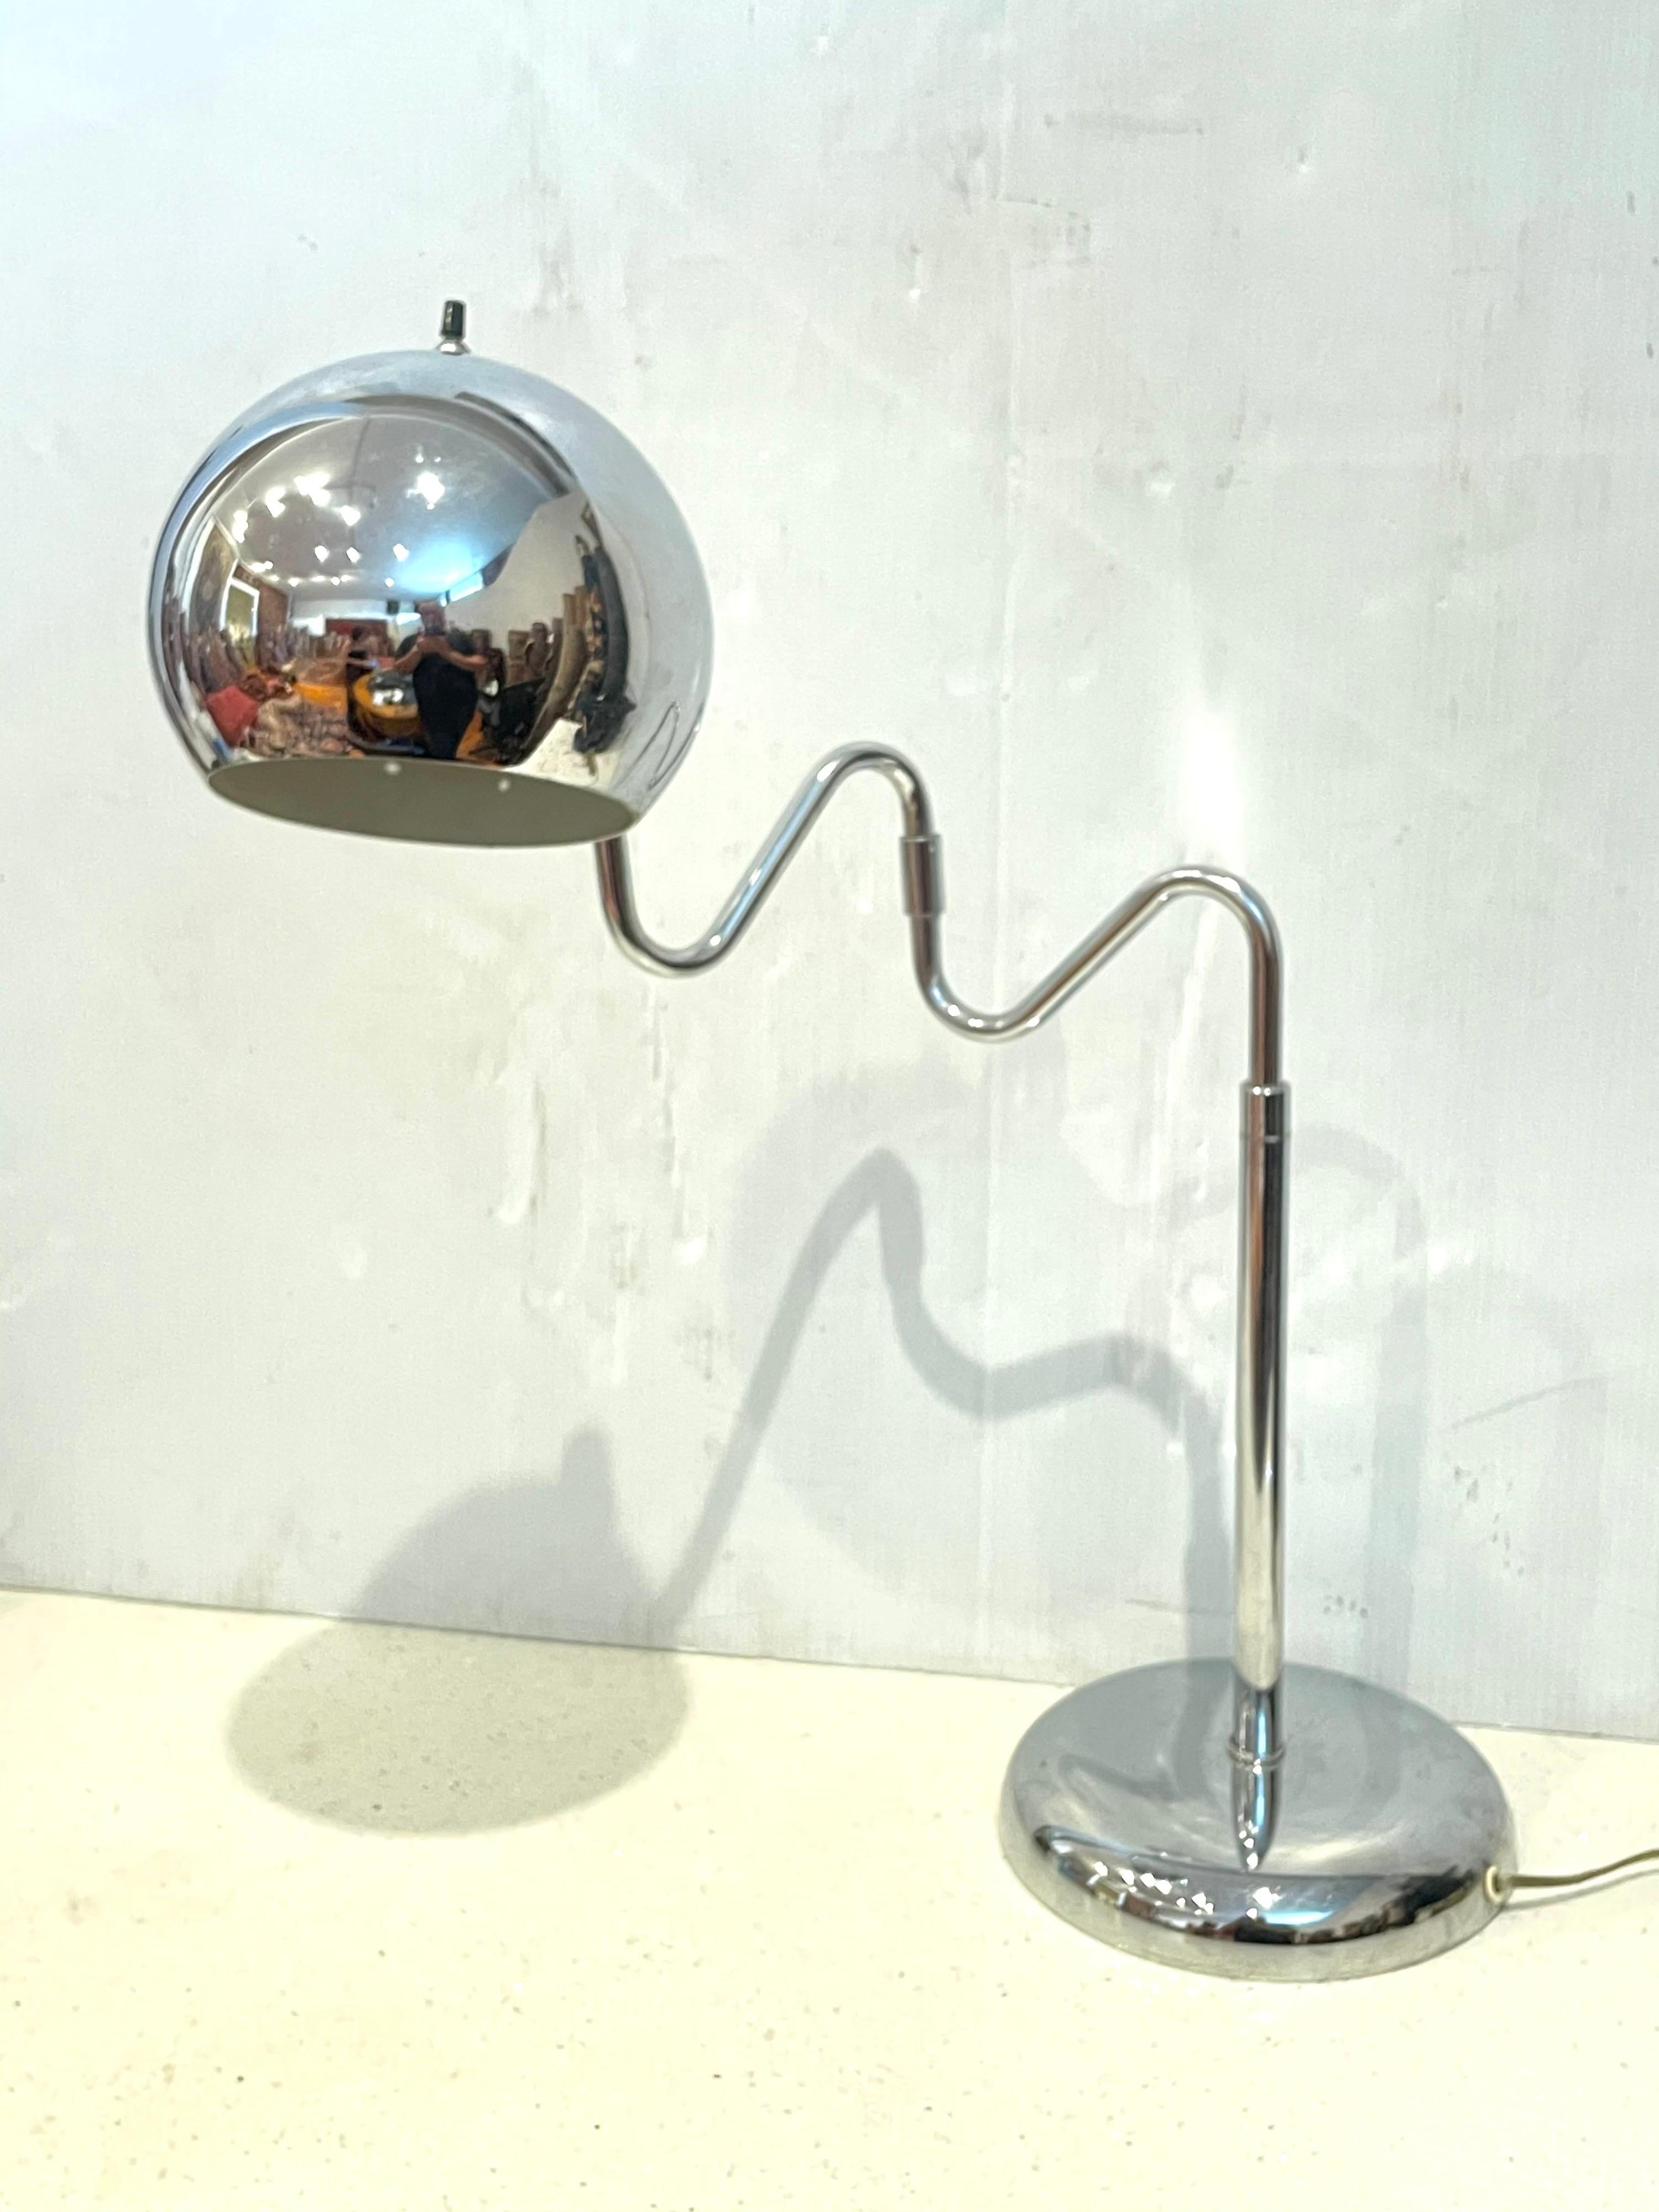 Rare 1970's Space-age table desk lamp by Robert Sonneman, the shade moves up and down and the arm swivels back and forward. We polished and cleaned the lamp its in perfect working condition.